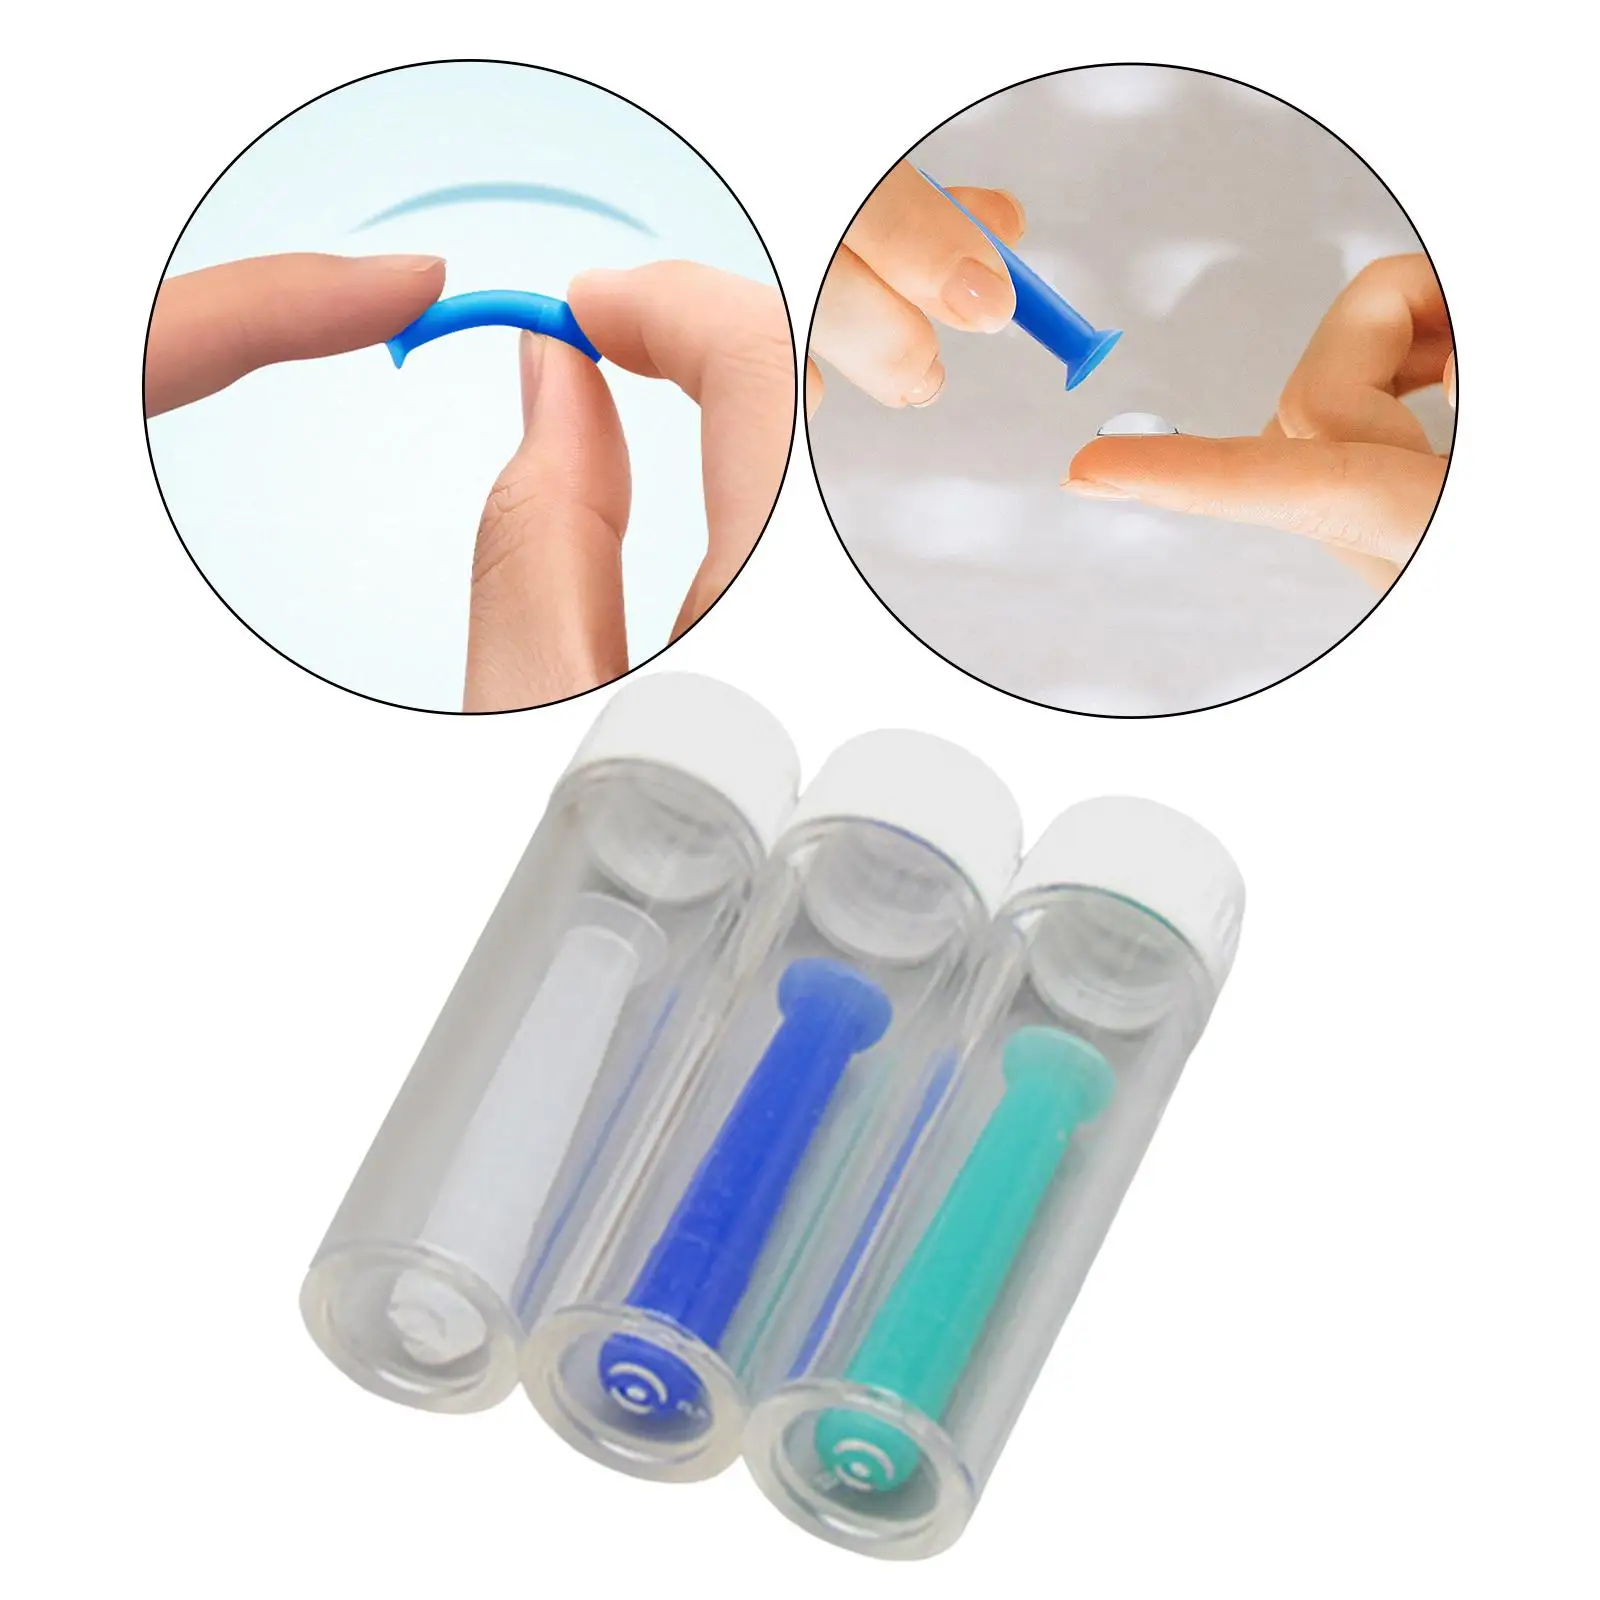 Silicone Contacts Inserter Remover Lightweight Portable with Storage Bottle Compact Soft Suction Cup Plunger for Rgp Lenses